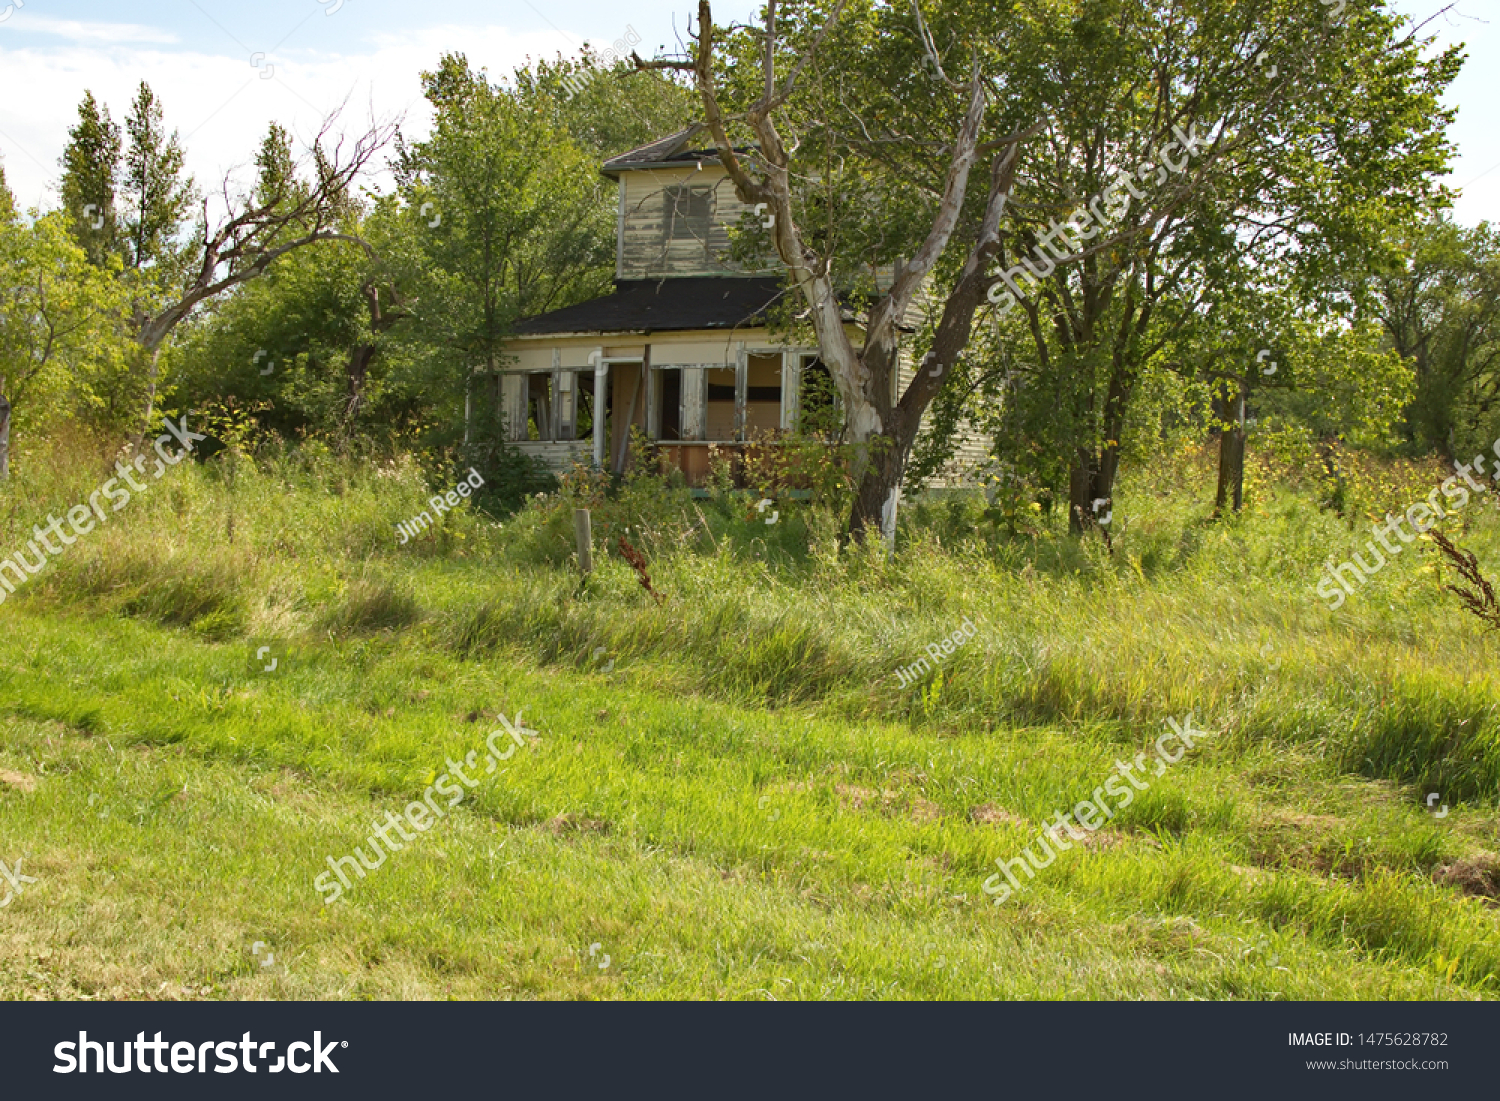 A torn apart old abandoned house peeking through the trees and overgrown lot. #1475628782